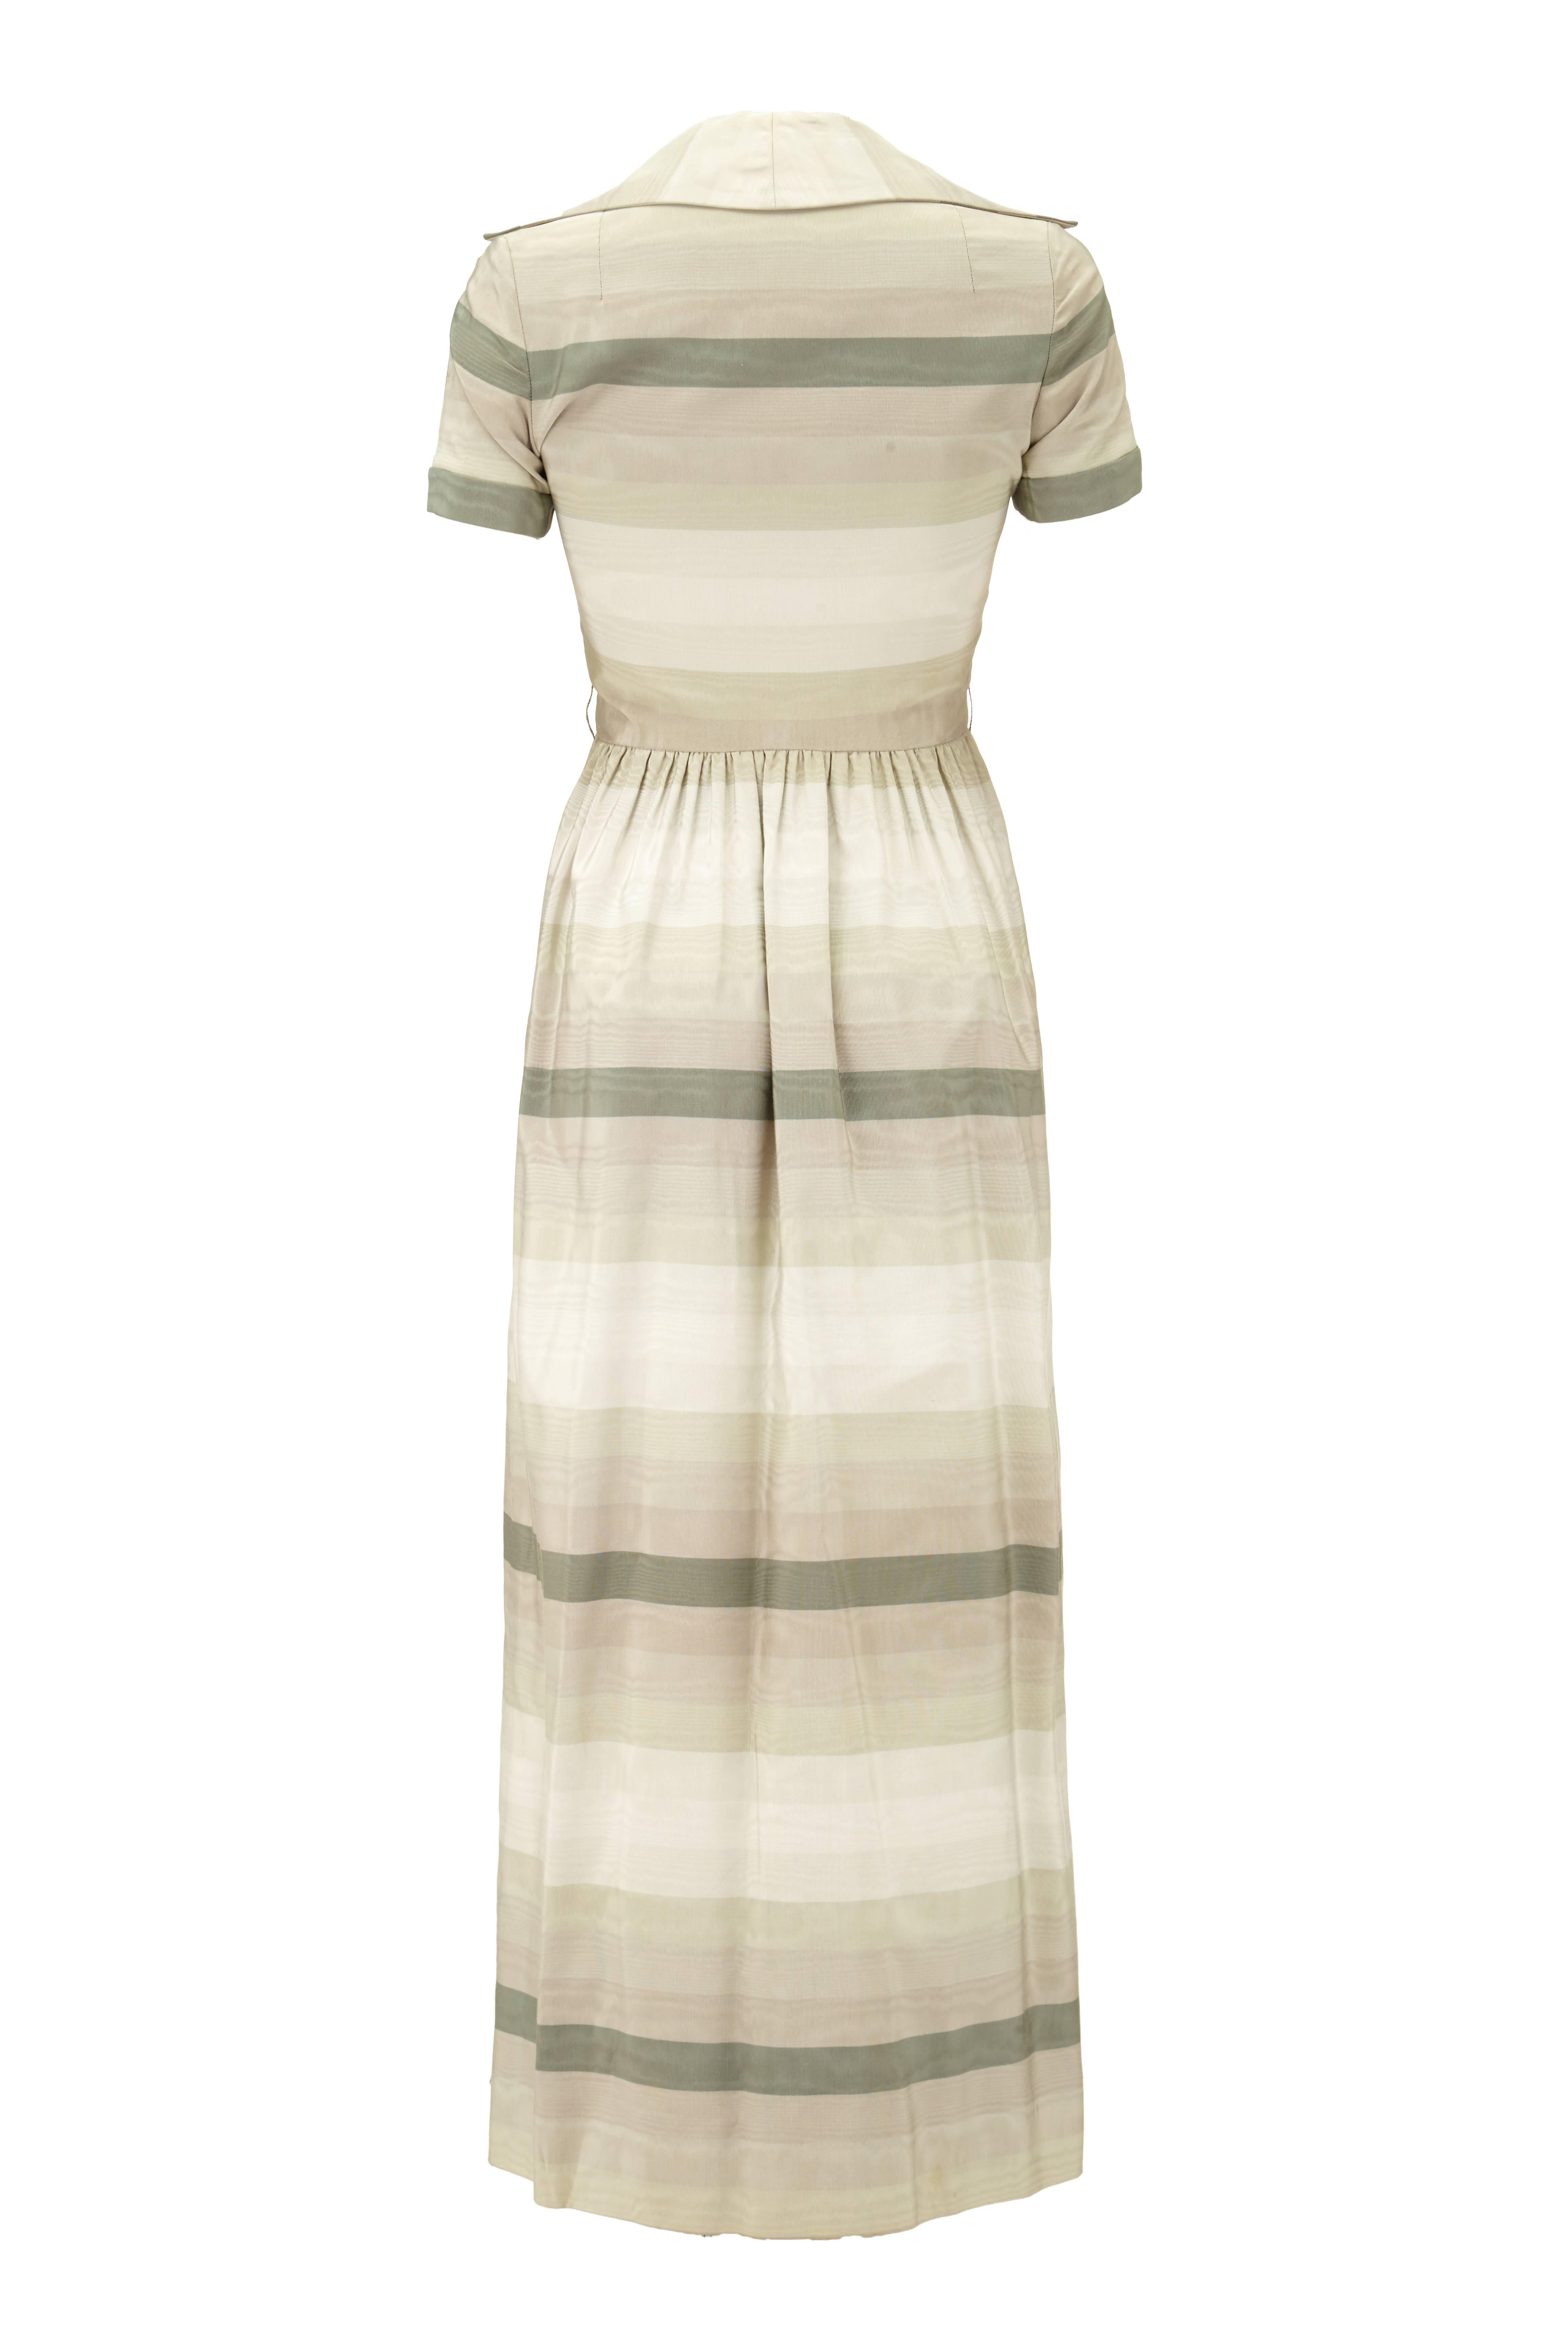 Fantastic heavy silk, long, shirt-waister dress with grey toned horizontal stripes by Oscar de la Renta. This vintage late 1960s pret-a-porter design was an early label for the designer after he branched out on his own having designed for the